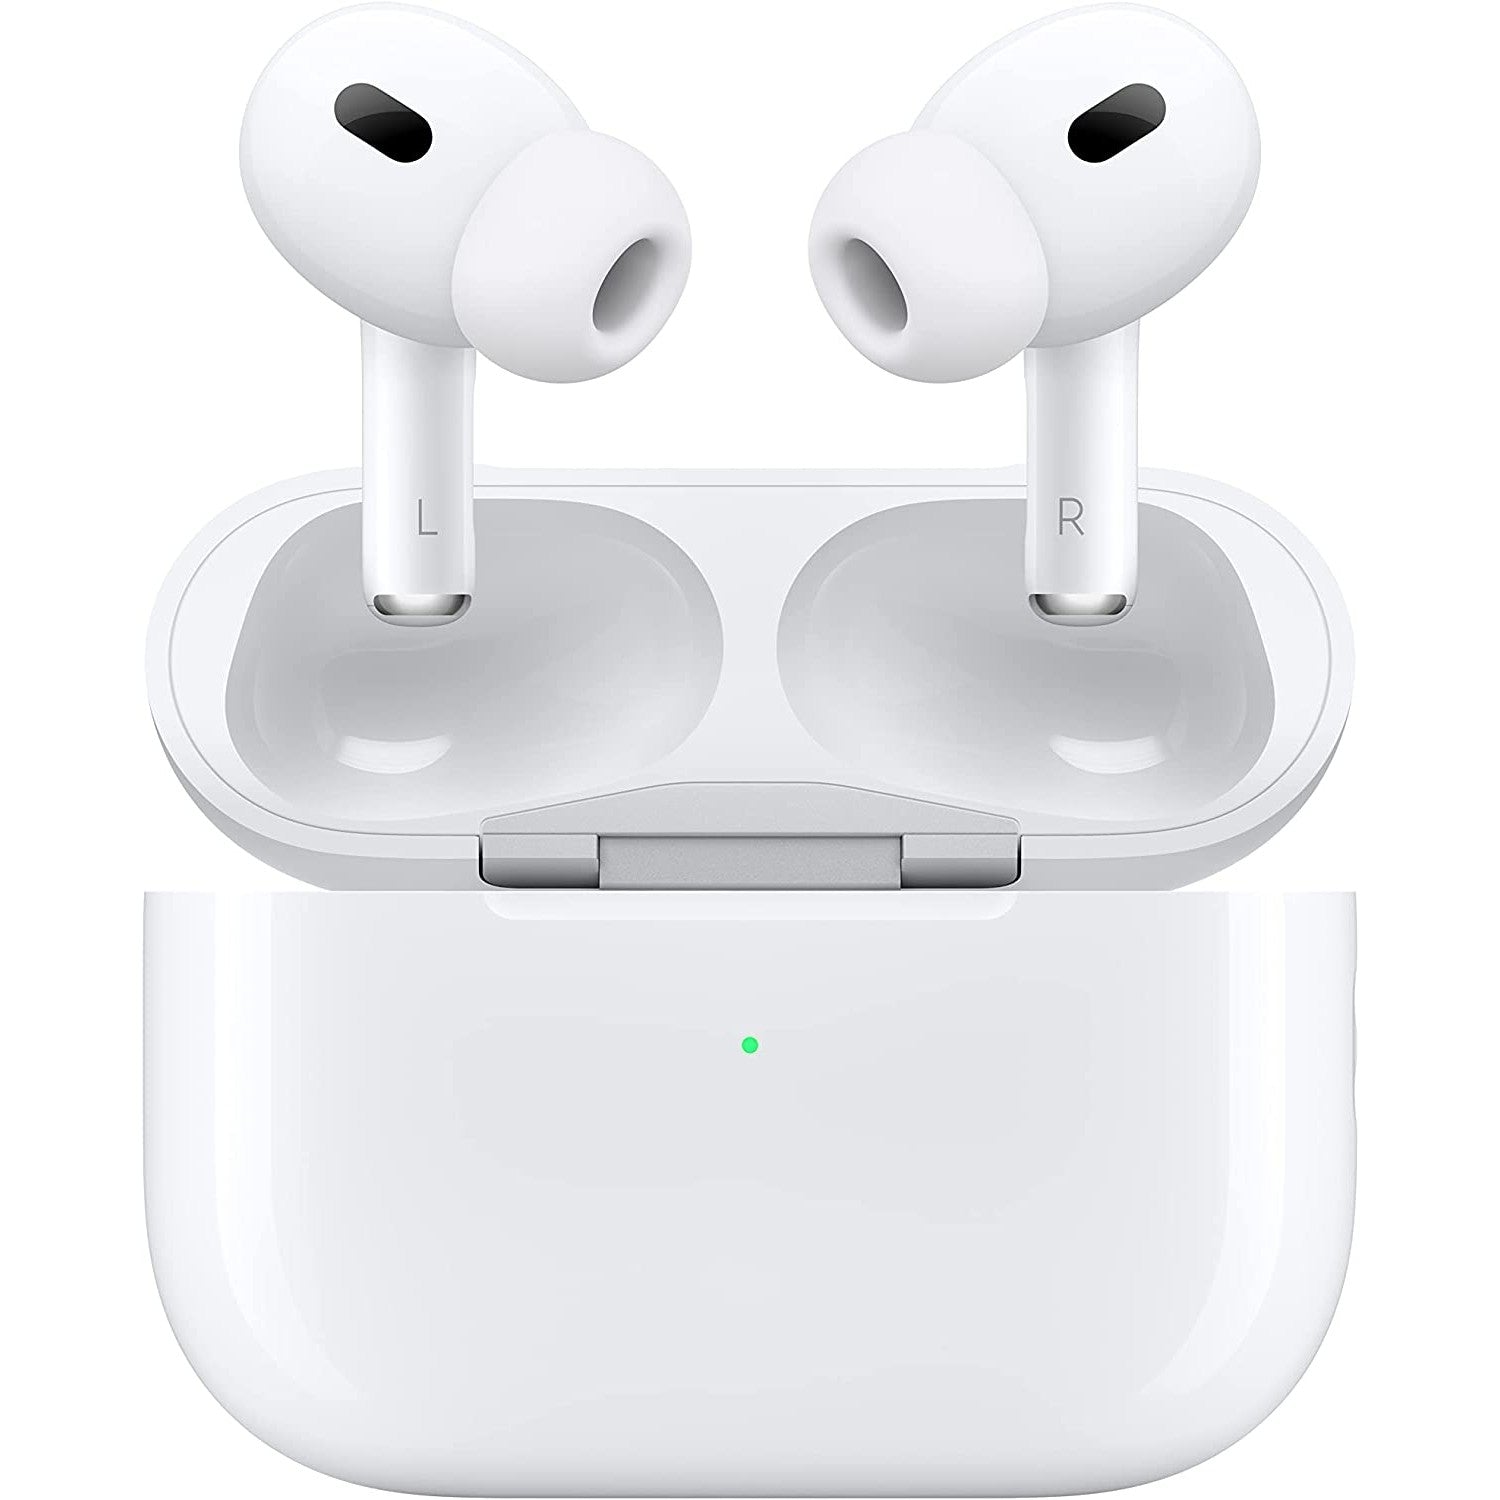 A pair of white Apple AirPods with a charging case.